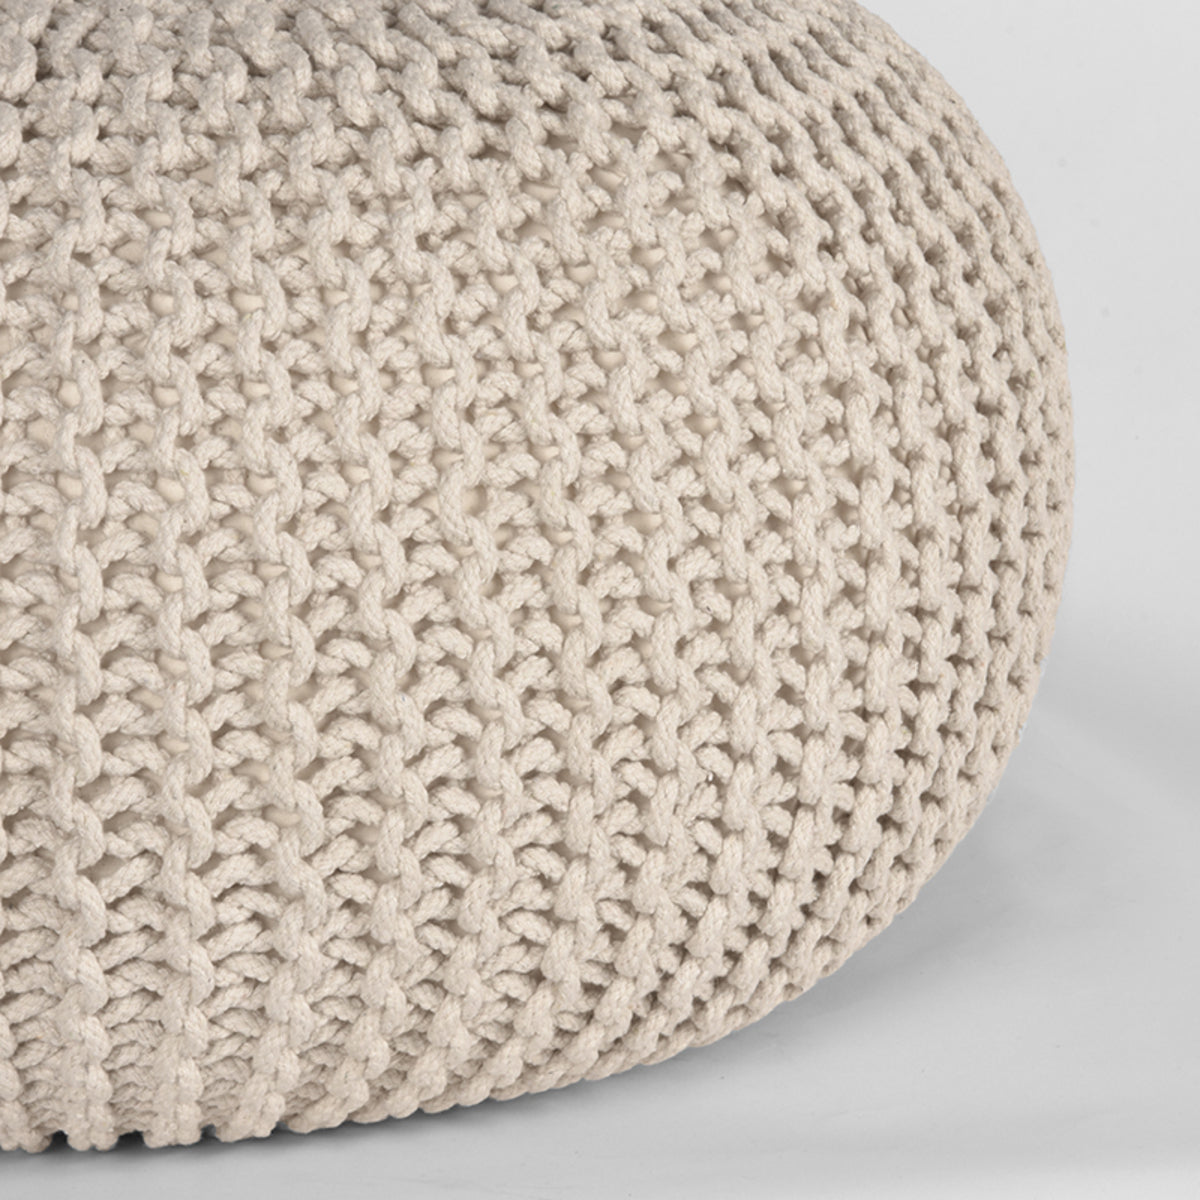 LABEL51 Pouf Knitted - Natural - Cotton - M